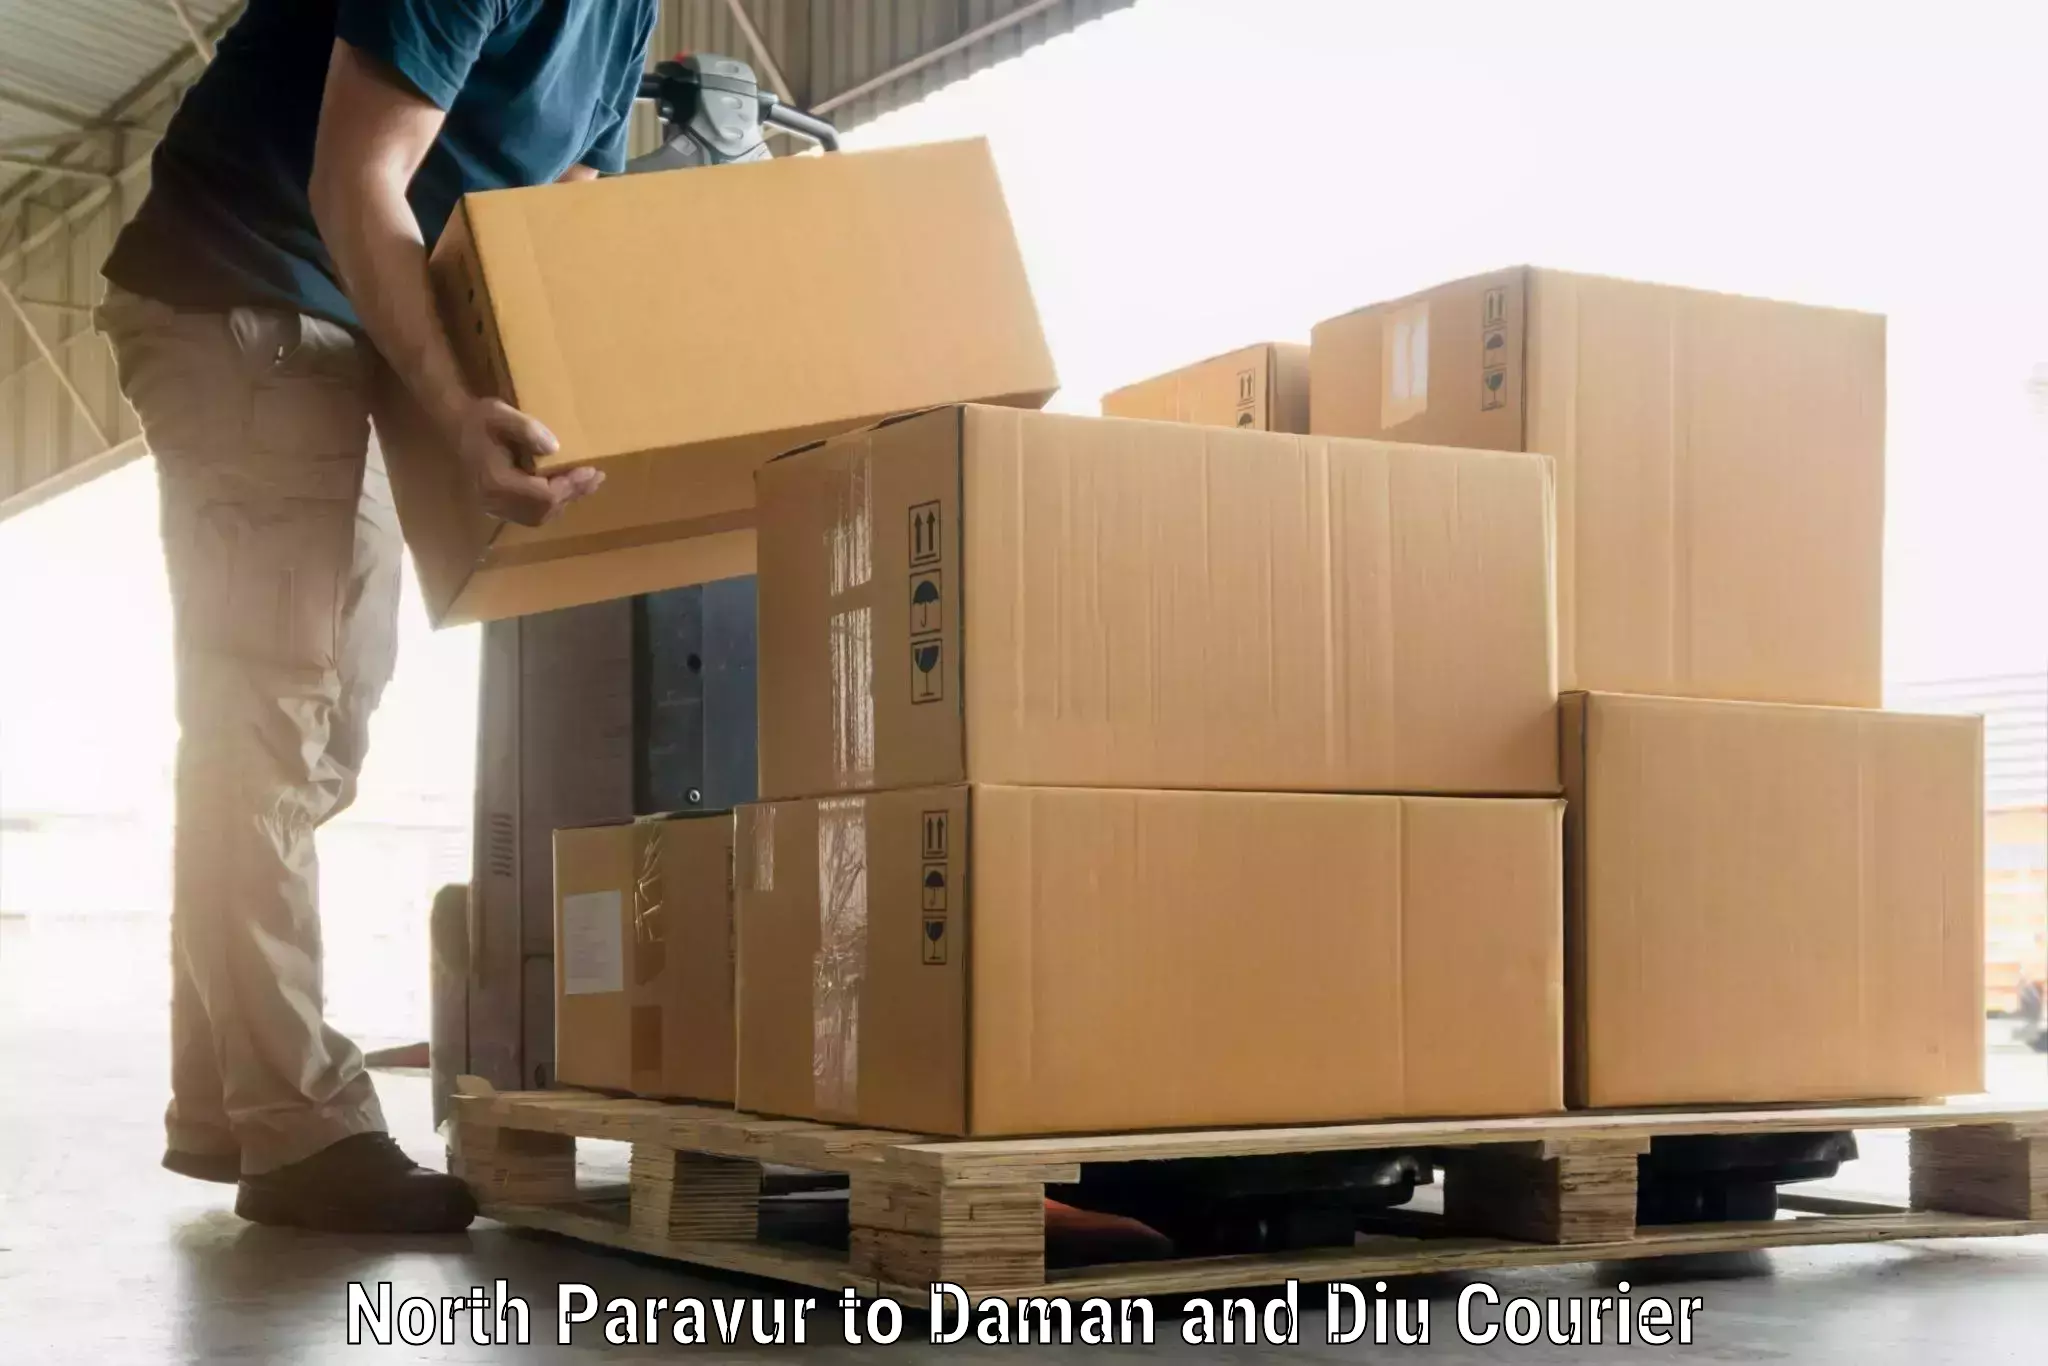 Luggage shipment strategy North Paravur to Daman and Diu